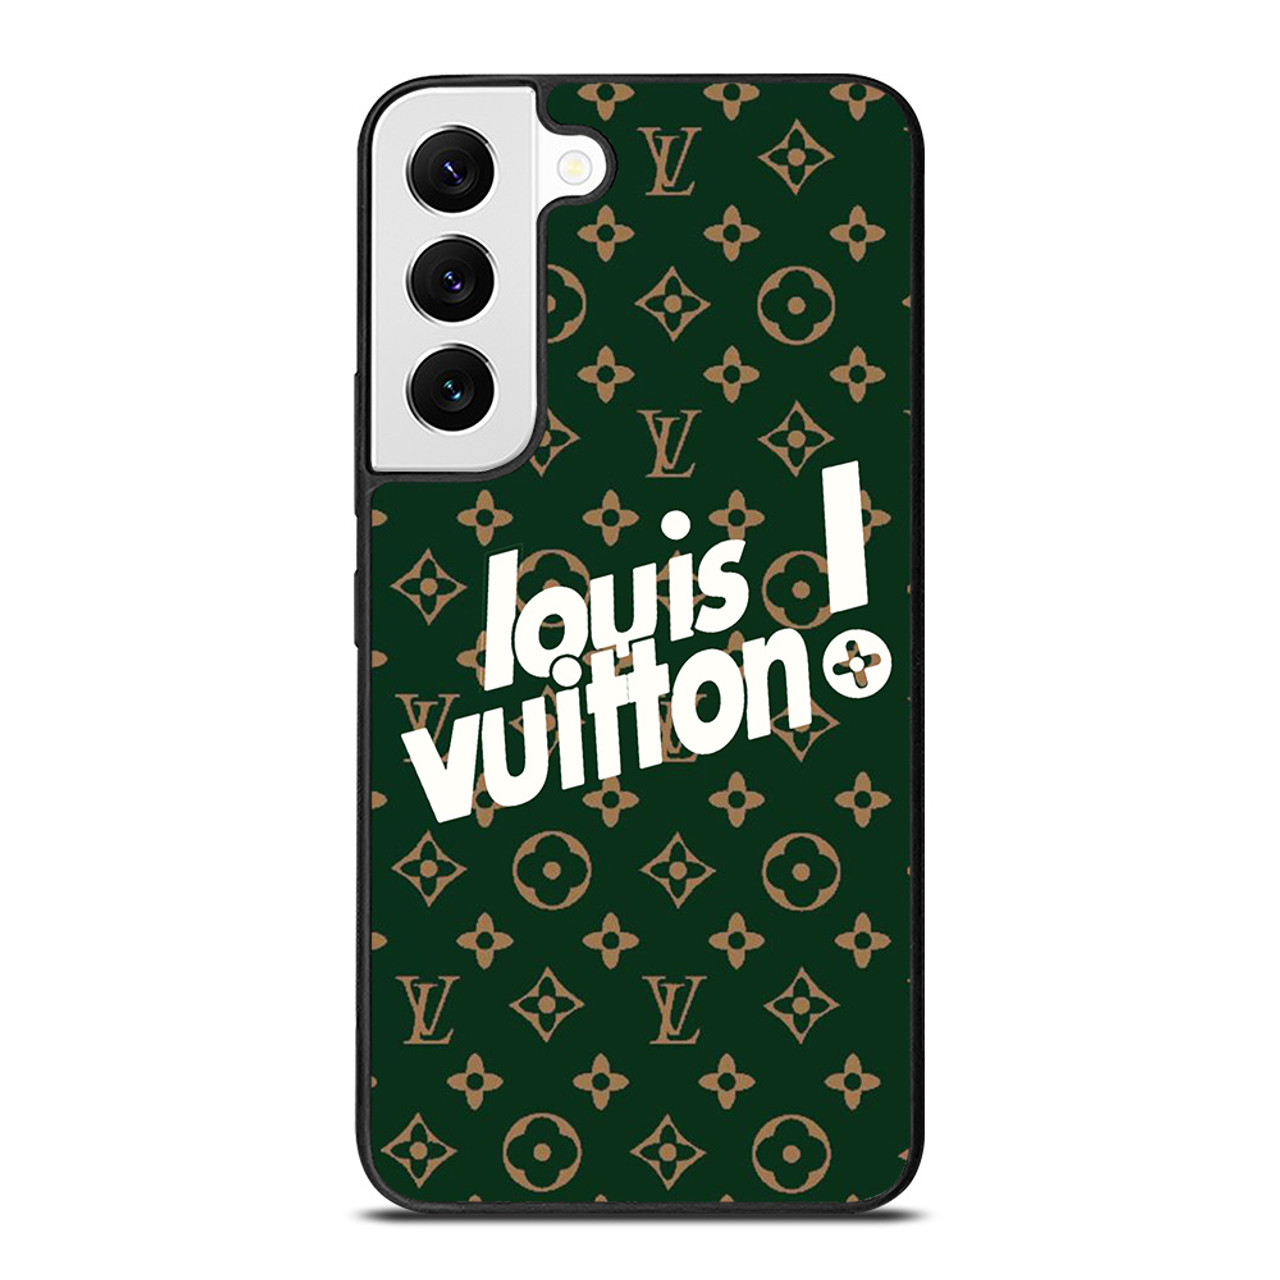 LOUIS VUITTON Cover Case For Samsung Galaxy S23 S22 Ultra S21 S20 Note 20 /7